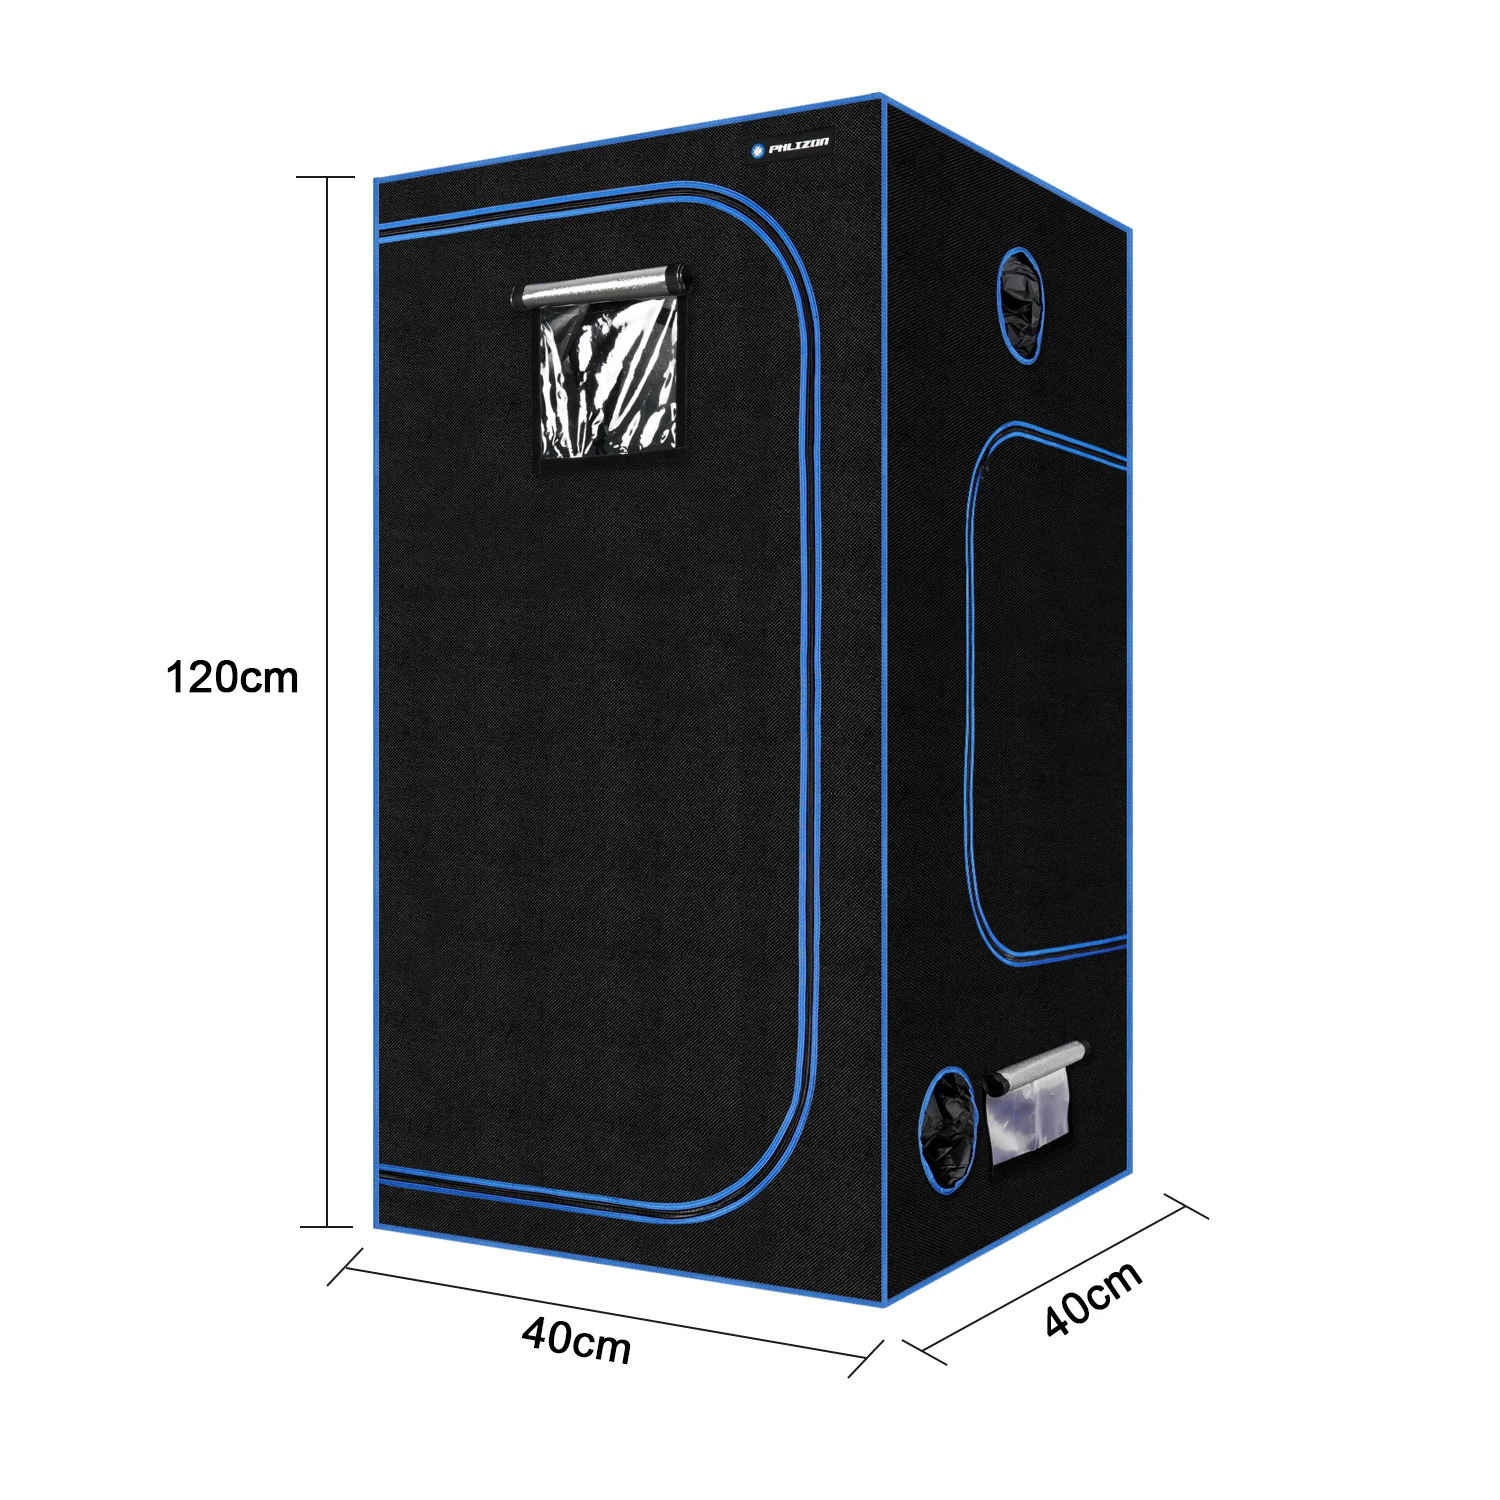 

600D Hydroponics Indoor LED Grow Tent Planting System Non-toxic Plant Grow Tent 40*40*120cm